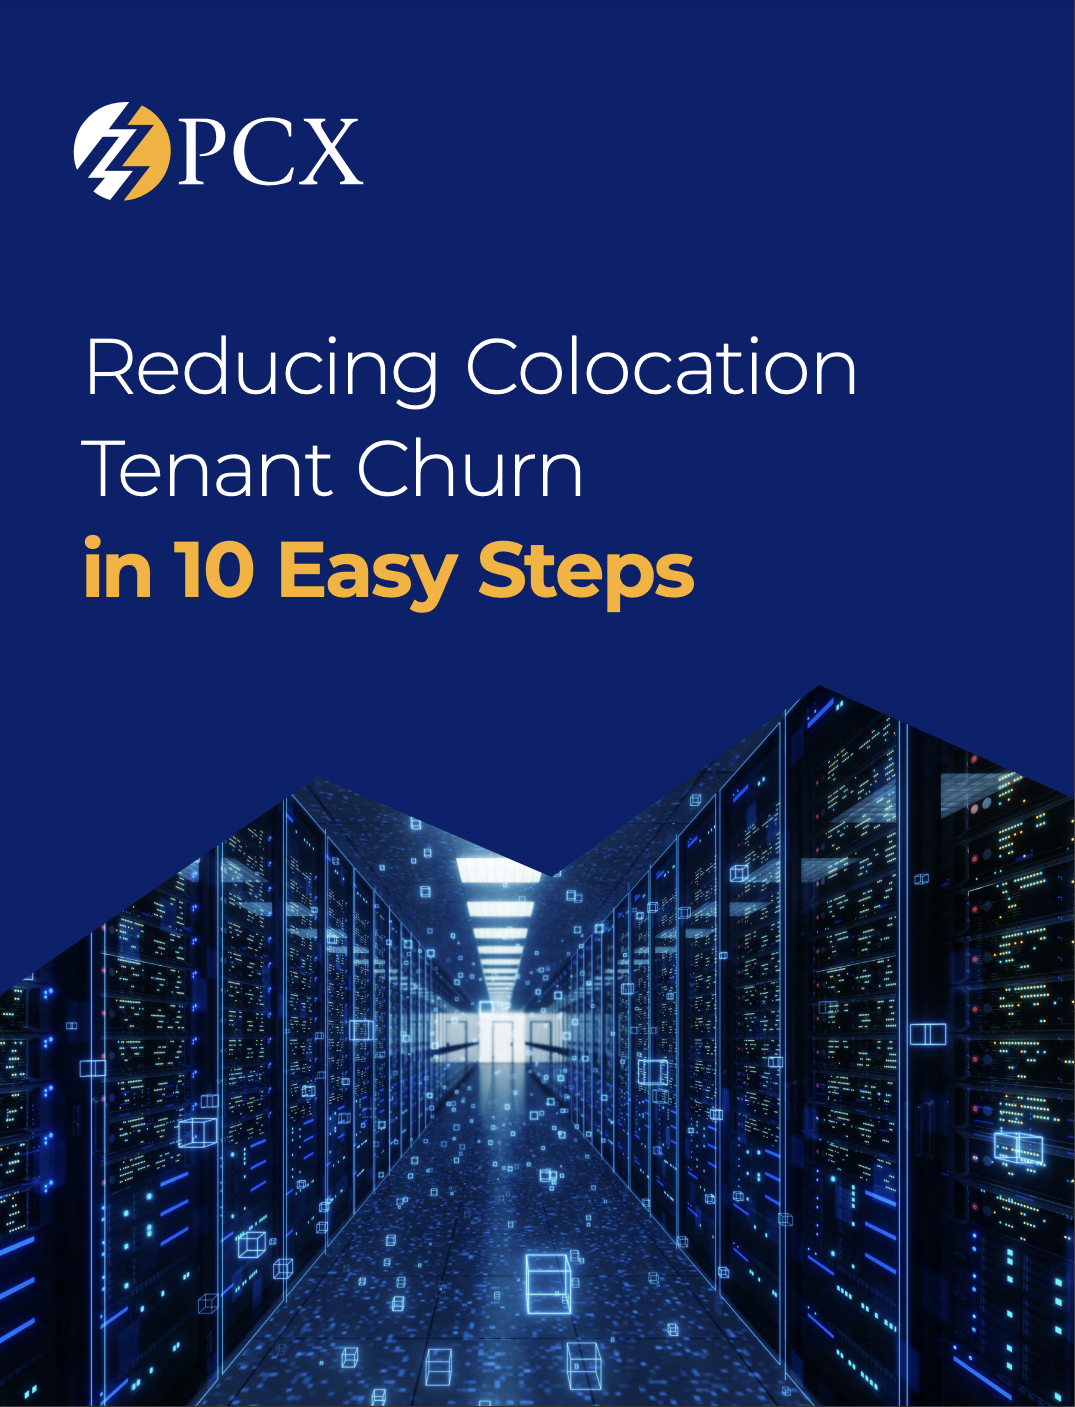 Reducing Colocation Tenant Churn in 10 Easy Steps